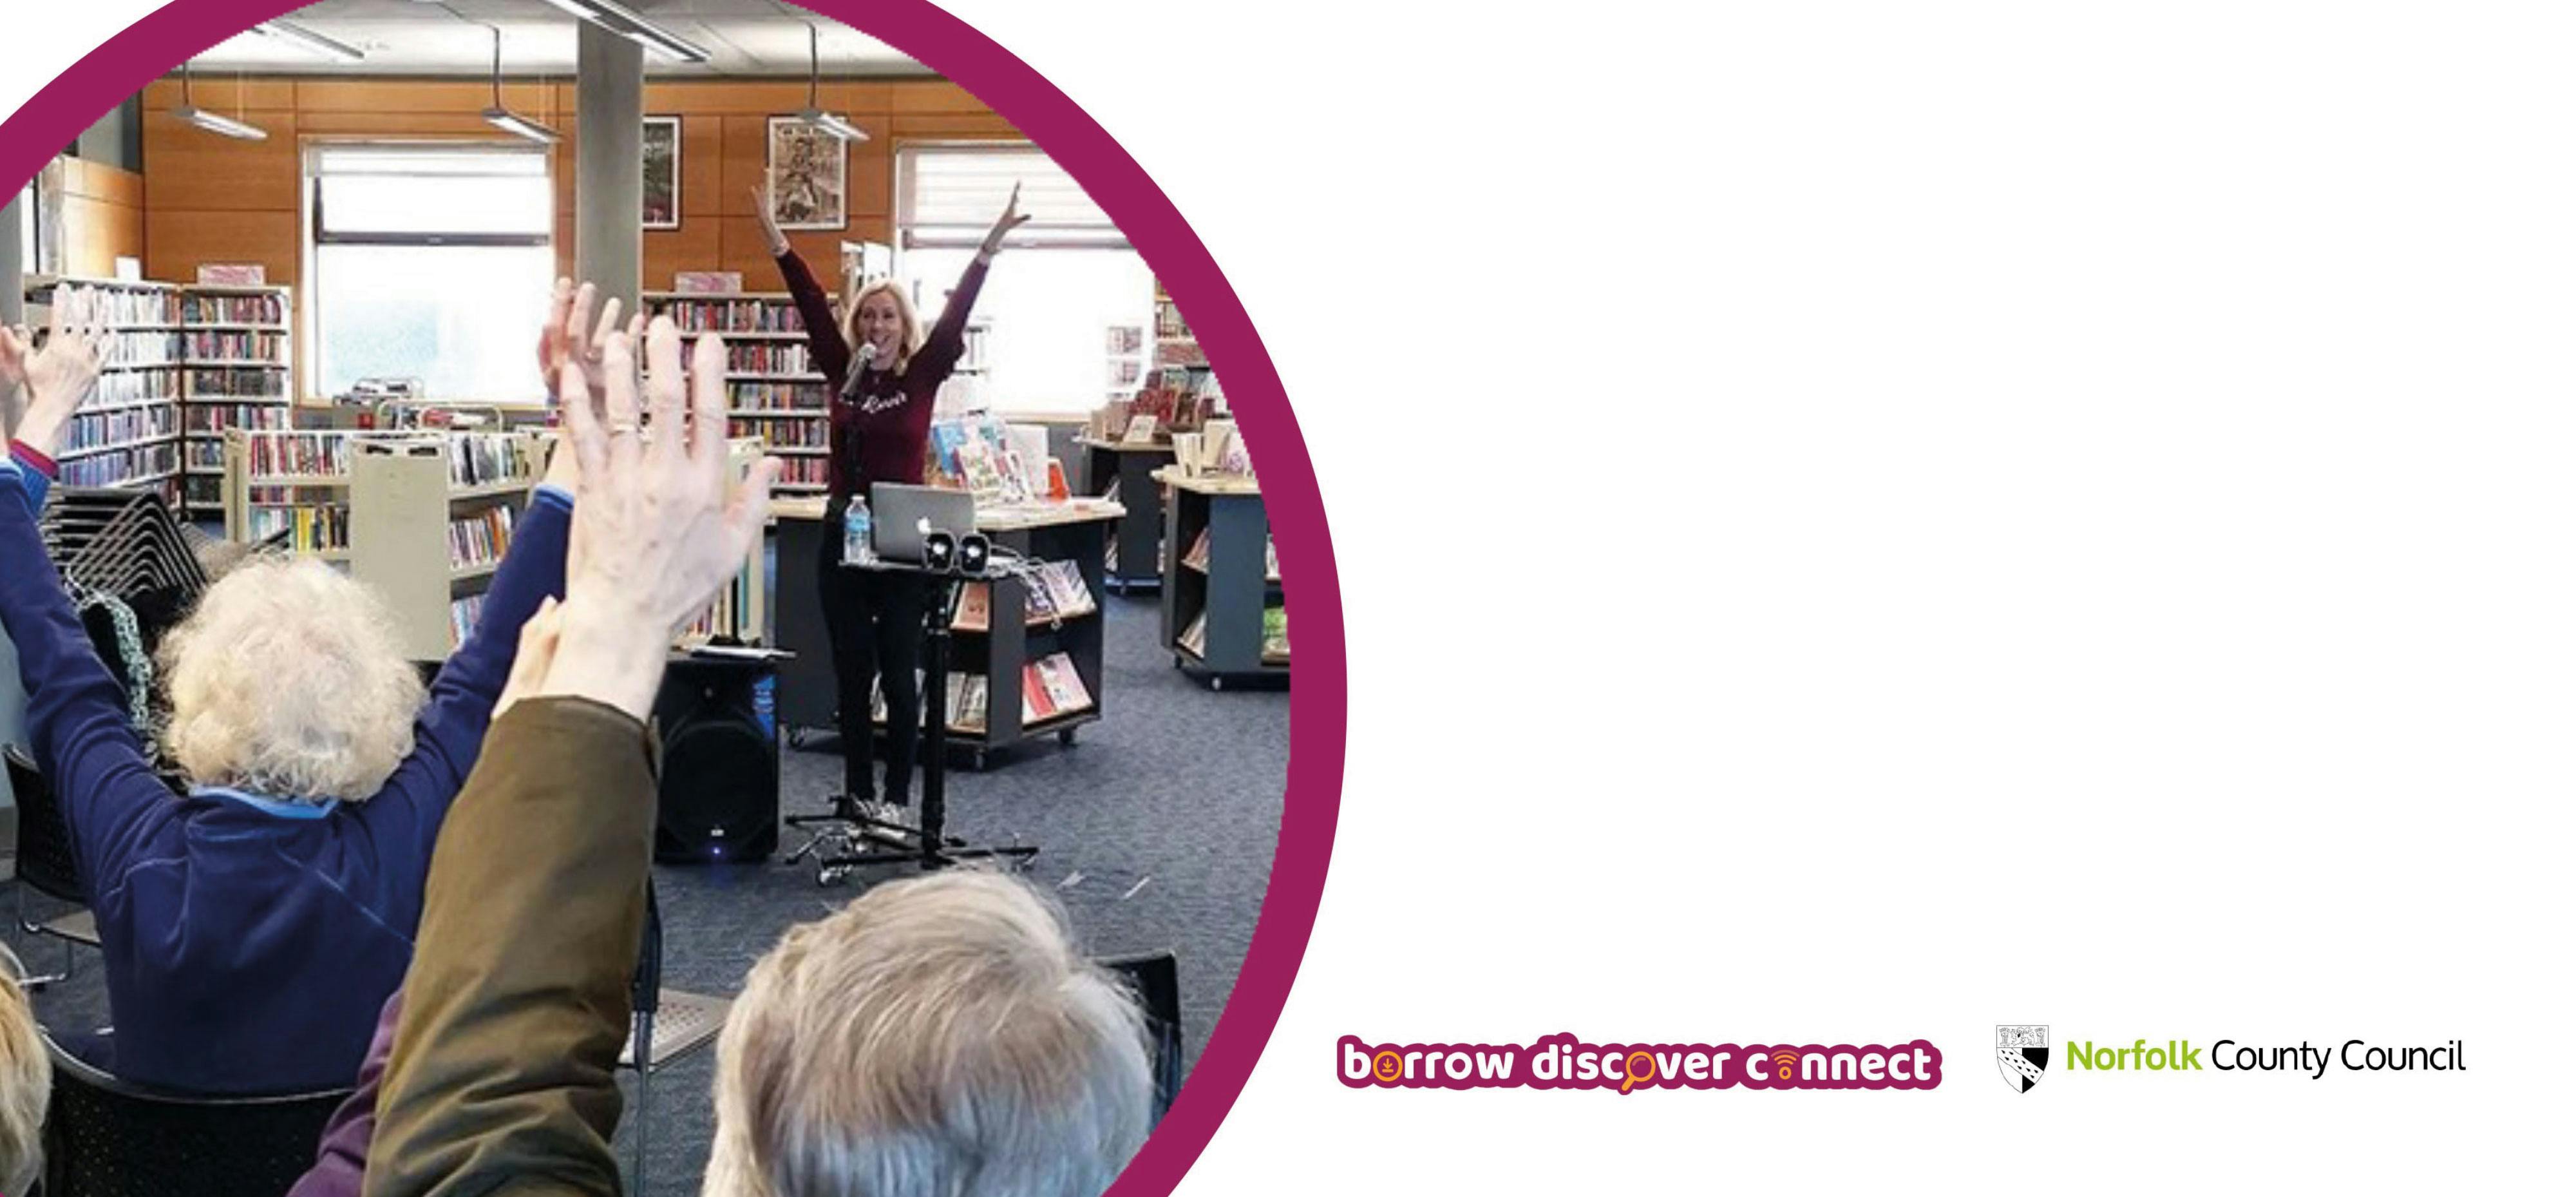 A musician sings in a library with her hands in the air, the audience are copying..